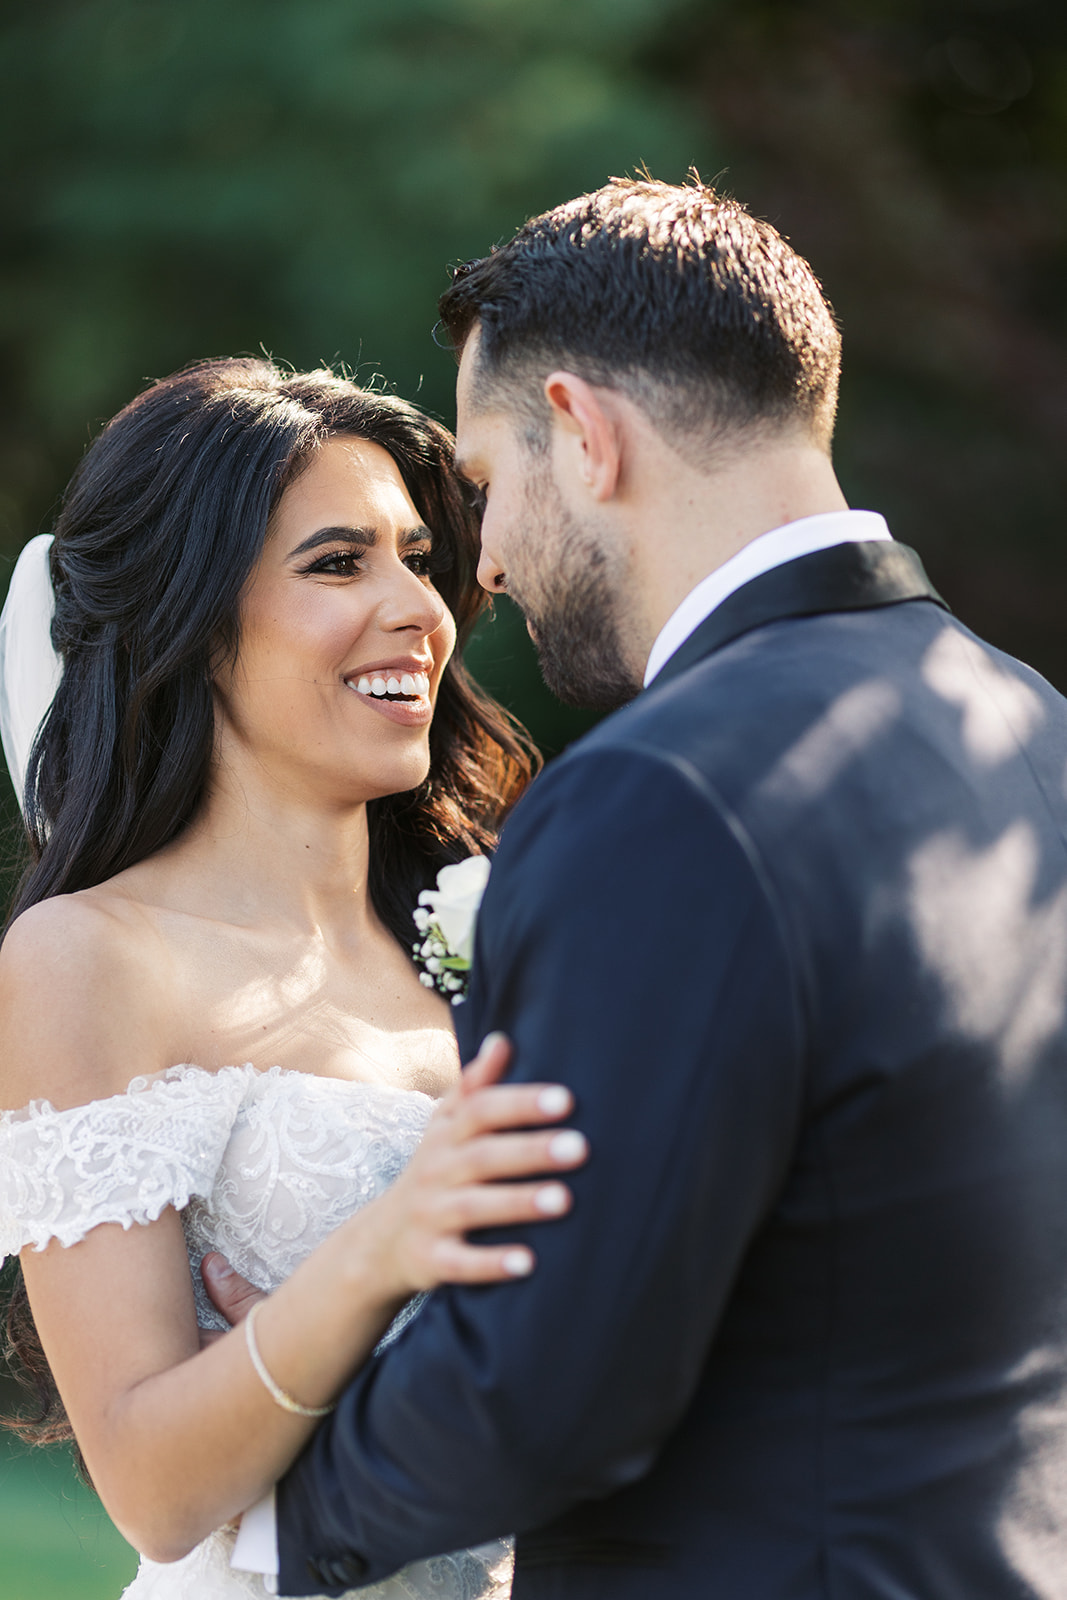 Newlyweds dance and smile while standing in a garden at their The Farmhouse NJ wedding